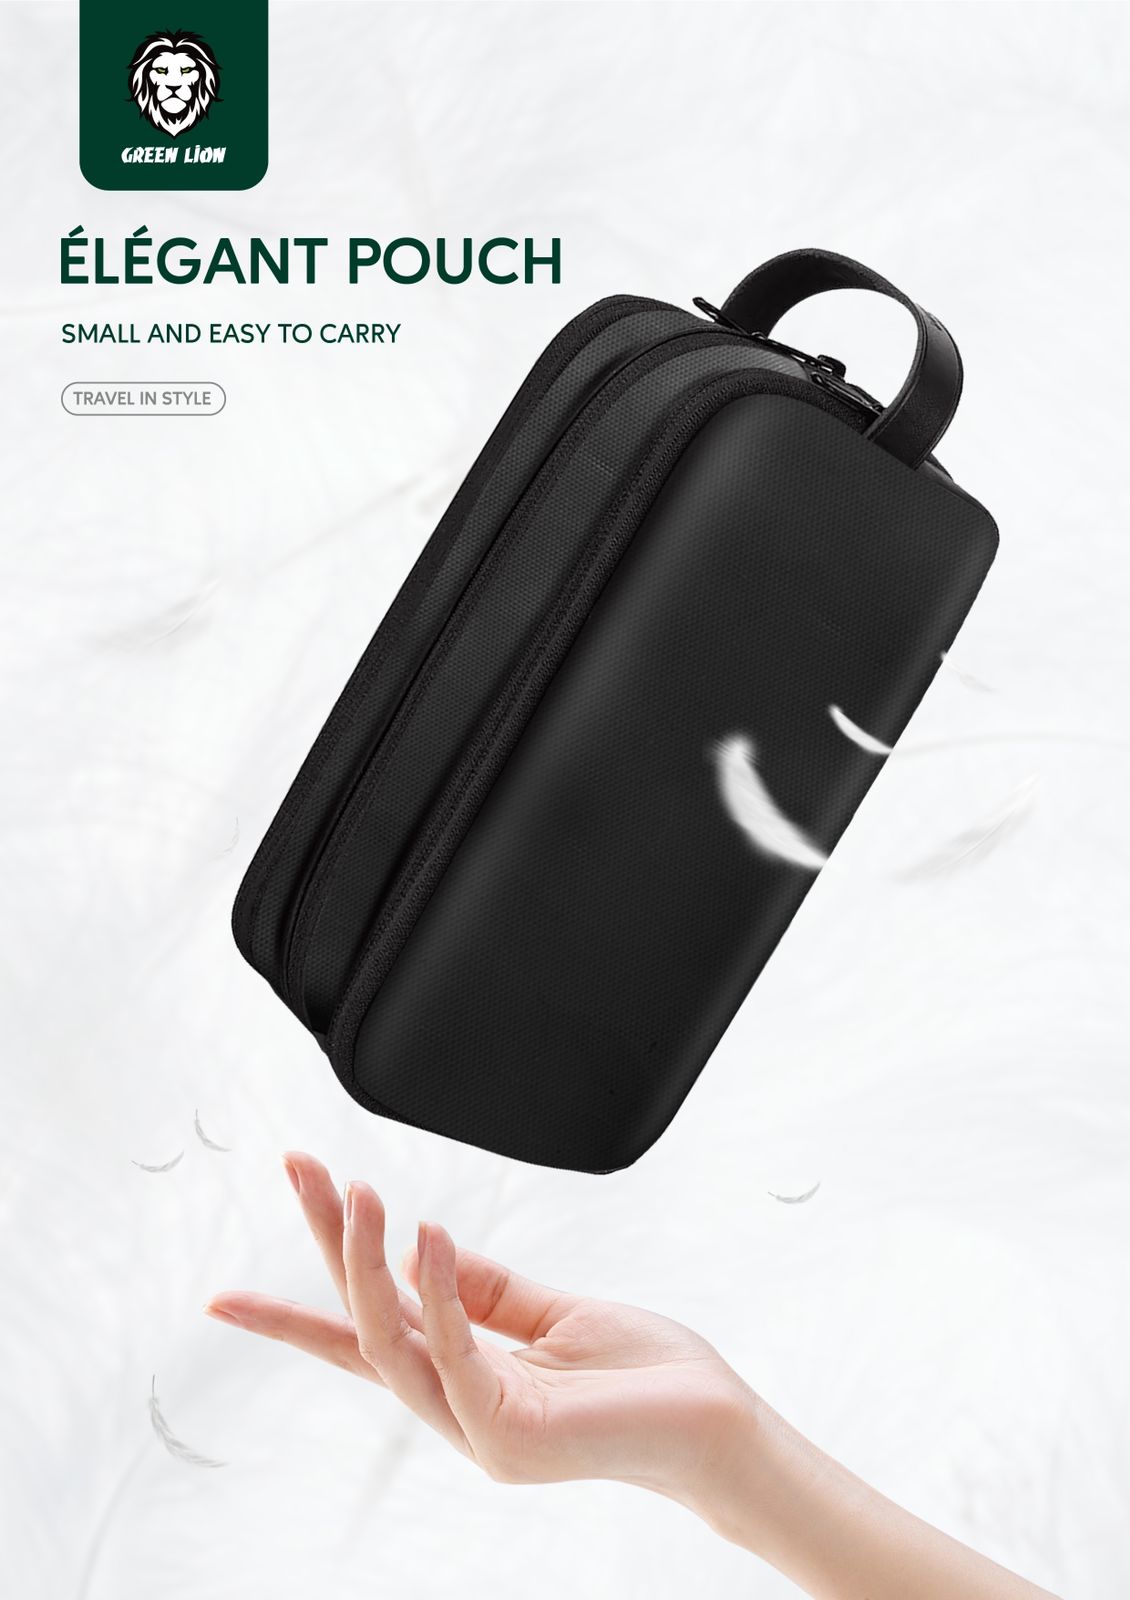 Green Lion Elegant Pouch | For Travel Black | PLUGnPOINT